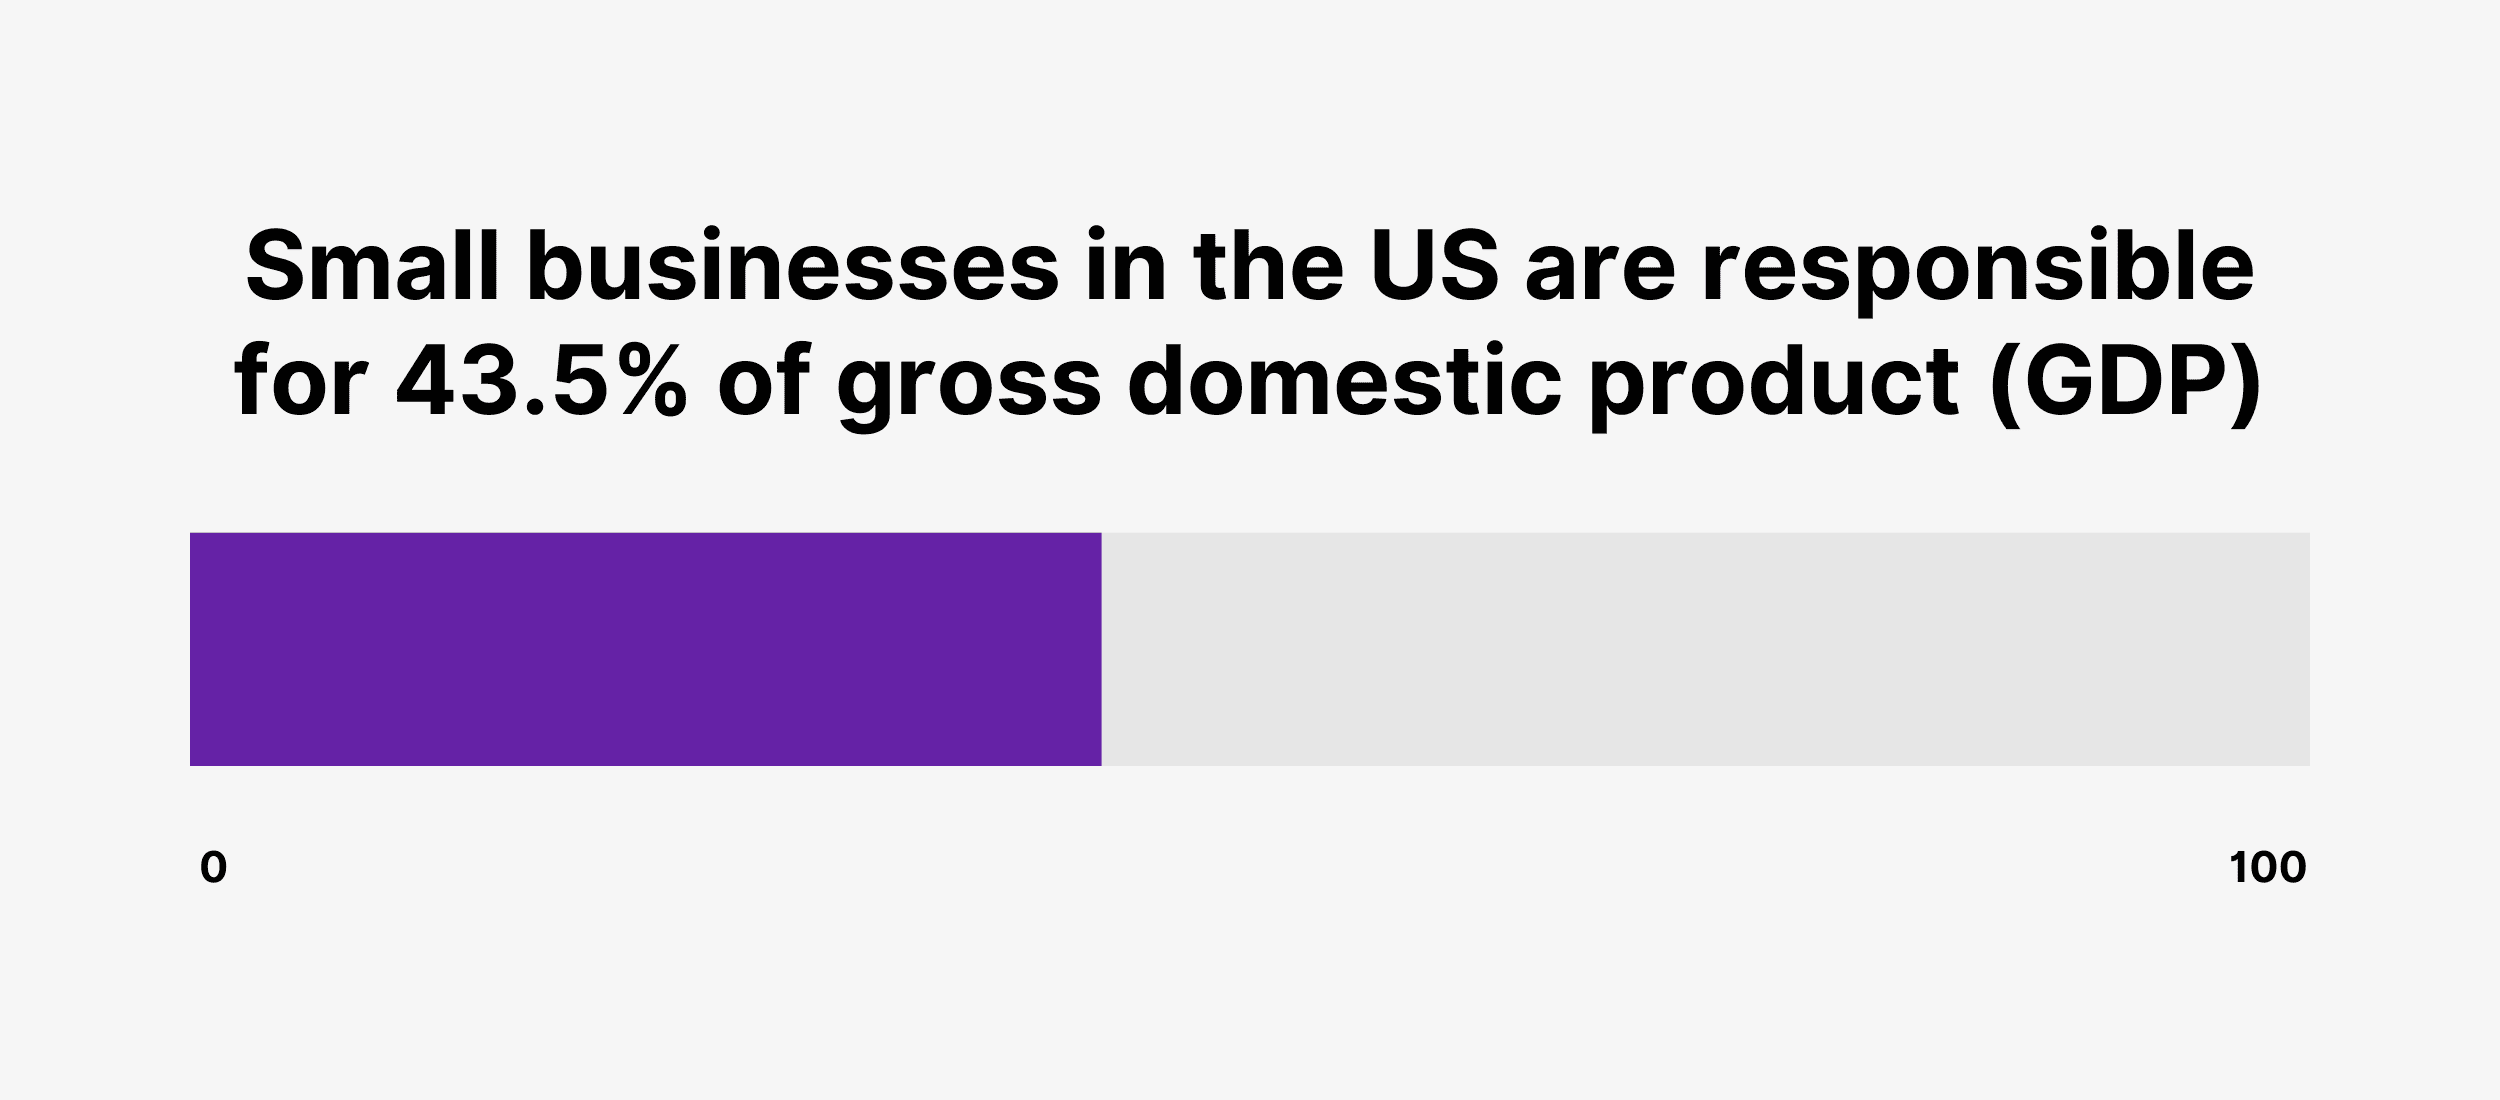 Small businesses in the US are responsible for 43.5% of gross domestic product (GDP)